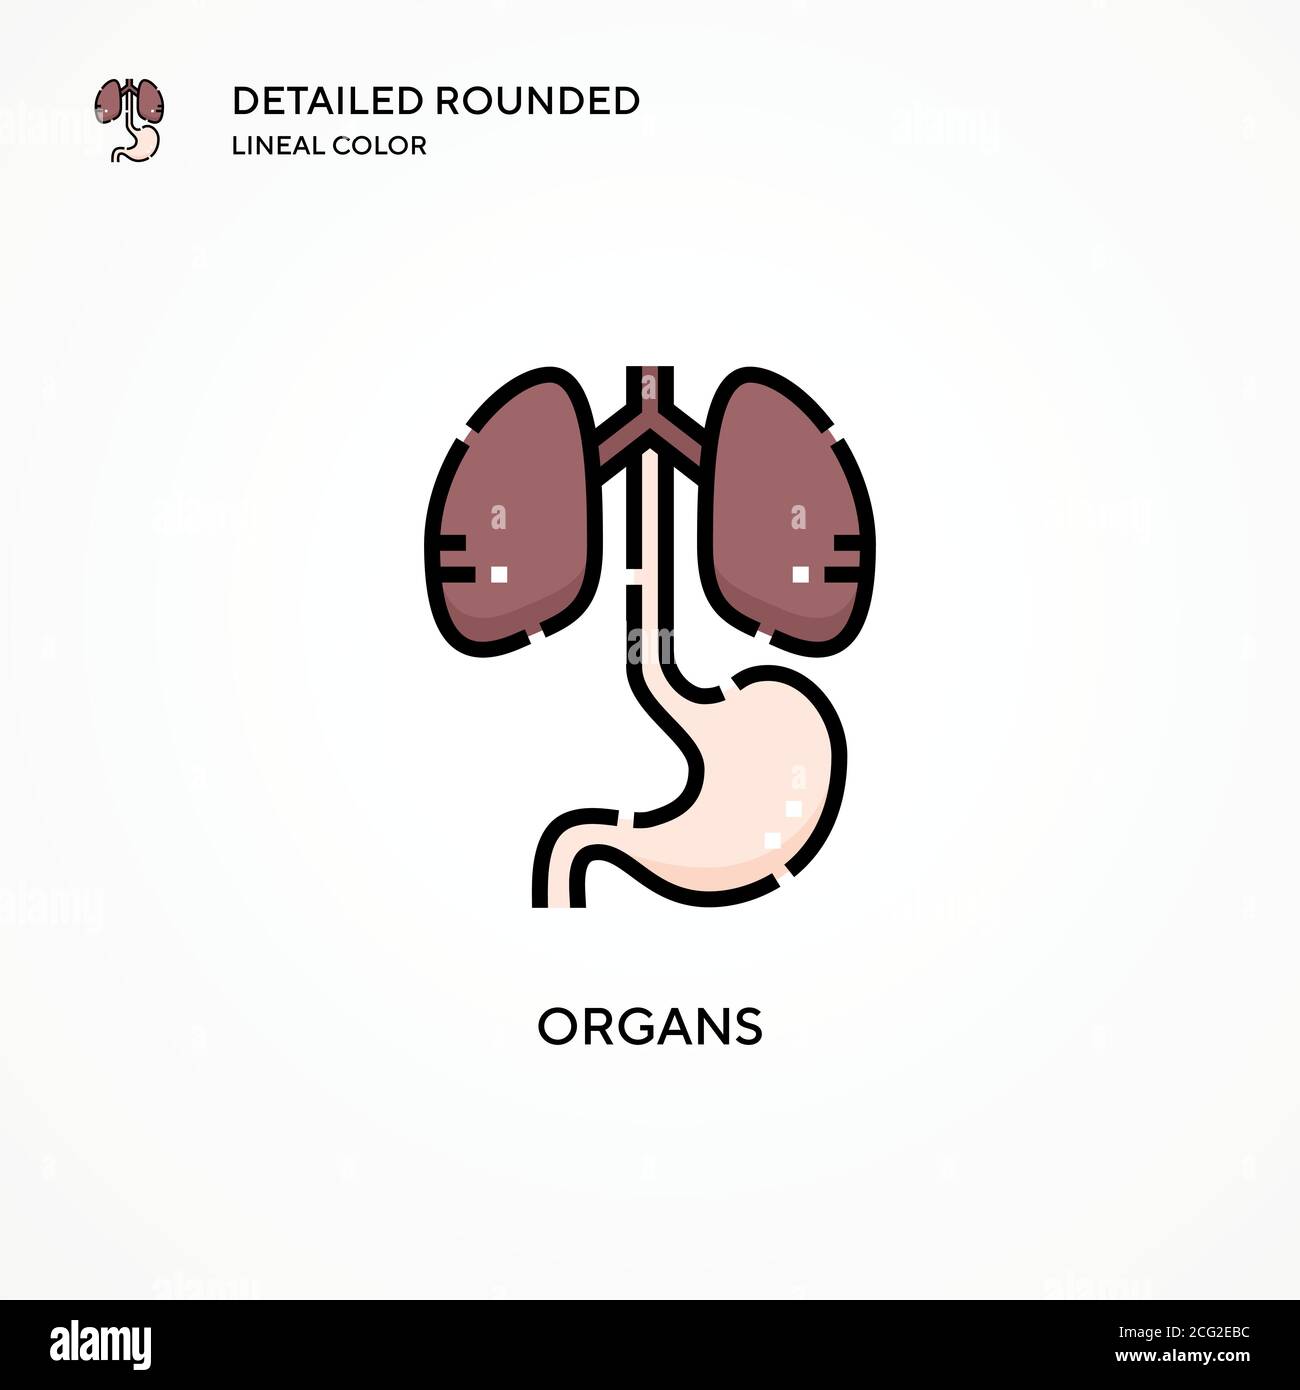 Organs vector icon. Modern vector illustration concepts. Easy to edit and customize. Stock Vector